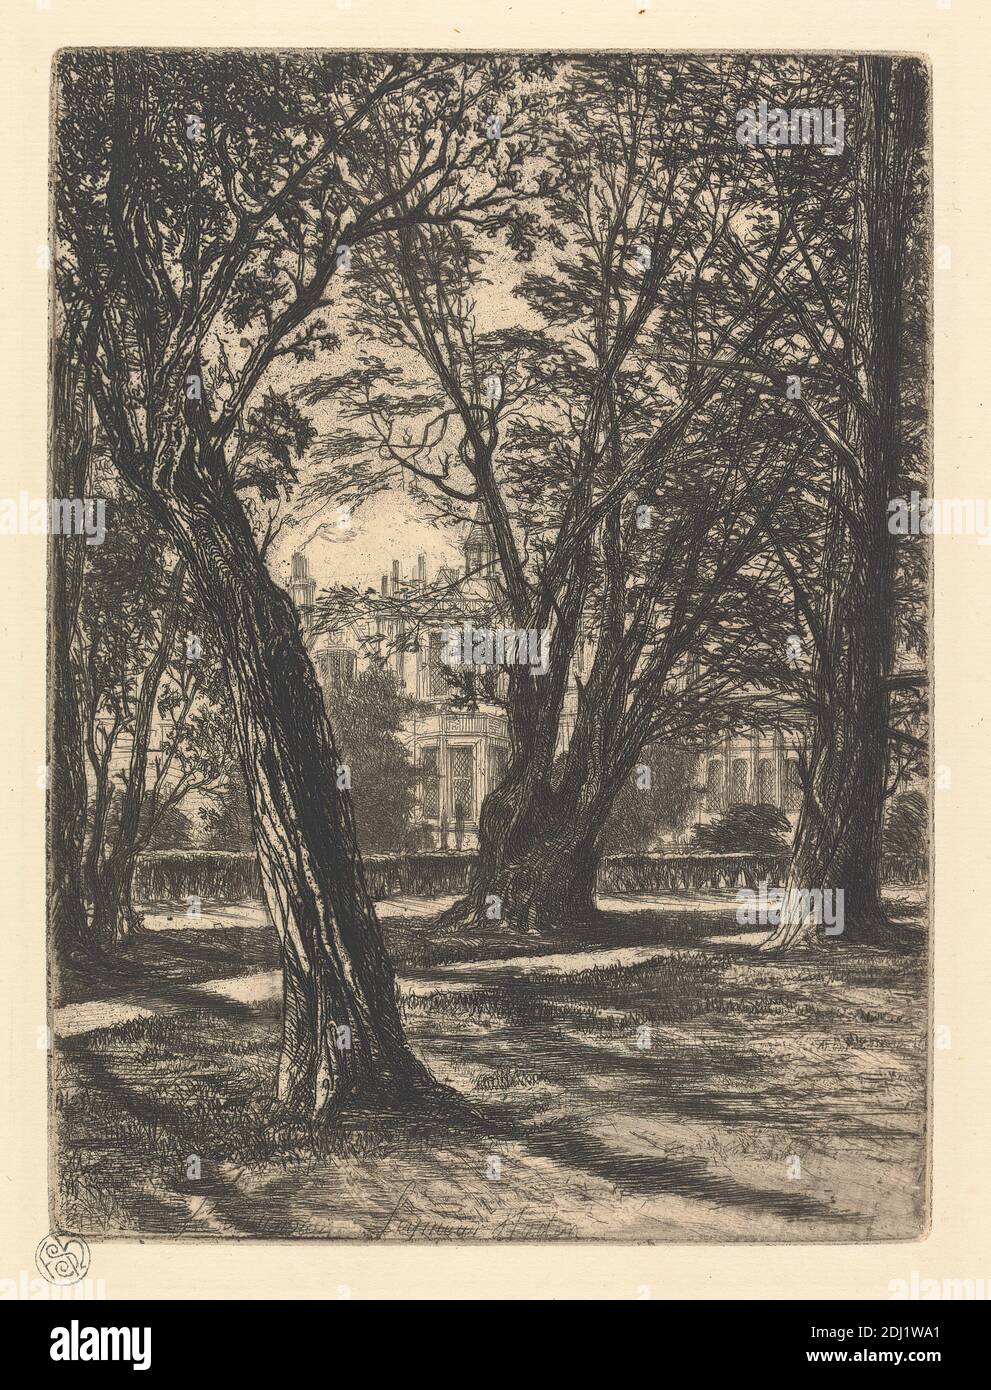 Kensington Gardens, no. 1 (small plate), Francis Seymour Haden, 1818–1910, British, 1859, Etching and drypoint, with plate tone on medium, slightly textured, cream antique laid paper, Sheet: 8 1/2 x 6 5/8 inches (21.6 x 16.9 cm), Plate: 6 1/4 x 4 5/8 inches (15.8 x 11.7 cm), and Image: 6 1/4 x 4 5/8 inches (15.8 x 11.7 cm), architectural subject, building, chimneys, cityscape, garden, grass, hedge, house, landscape, lawn, palace, path, shadows, trees, turret, windows, England, Europe, Hyde Park, Kensington, Kensington Gardens, London, United Kingdom Stock Photo